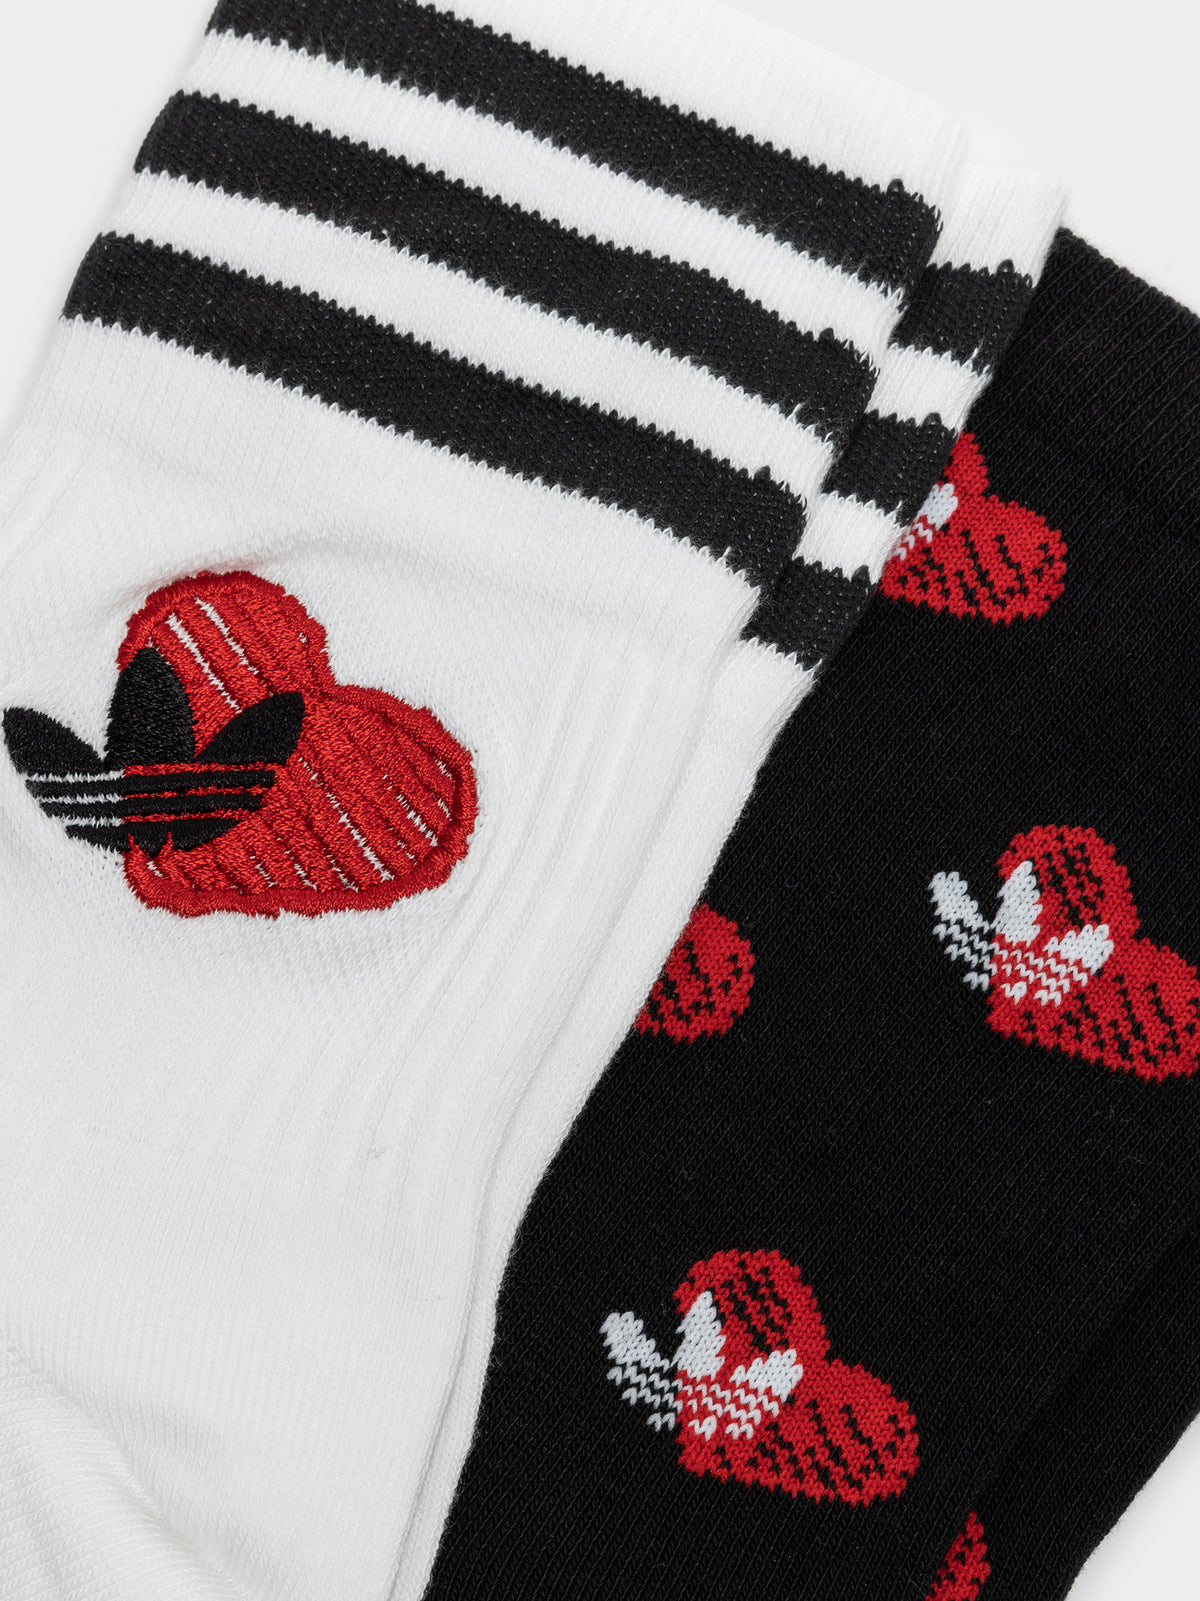 2 Pairs of V-Day Mid Cut Socks in White &amp; Red